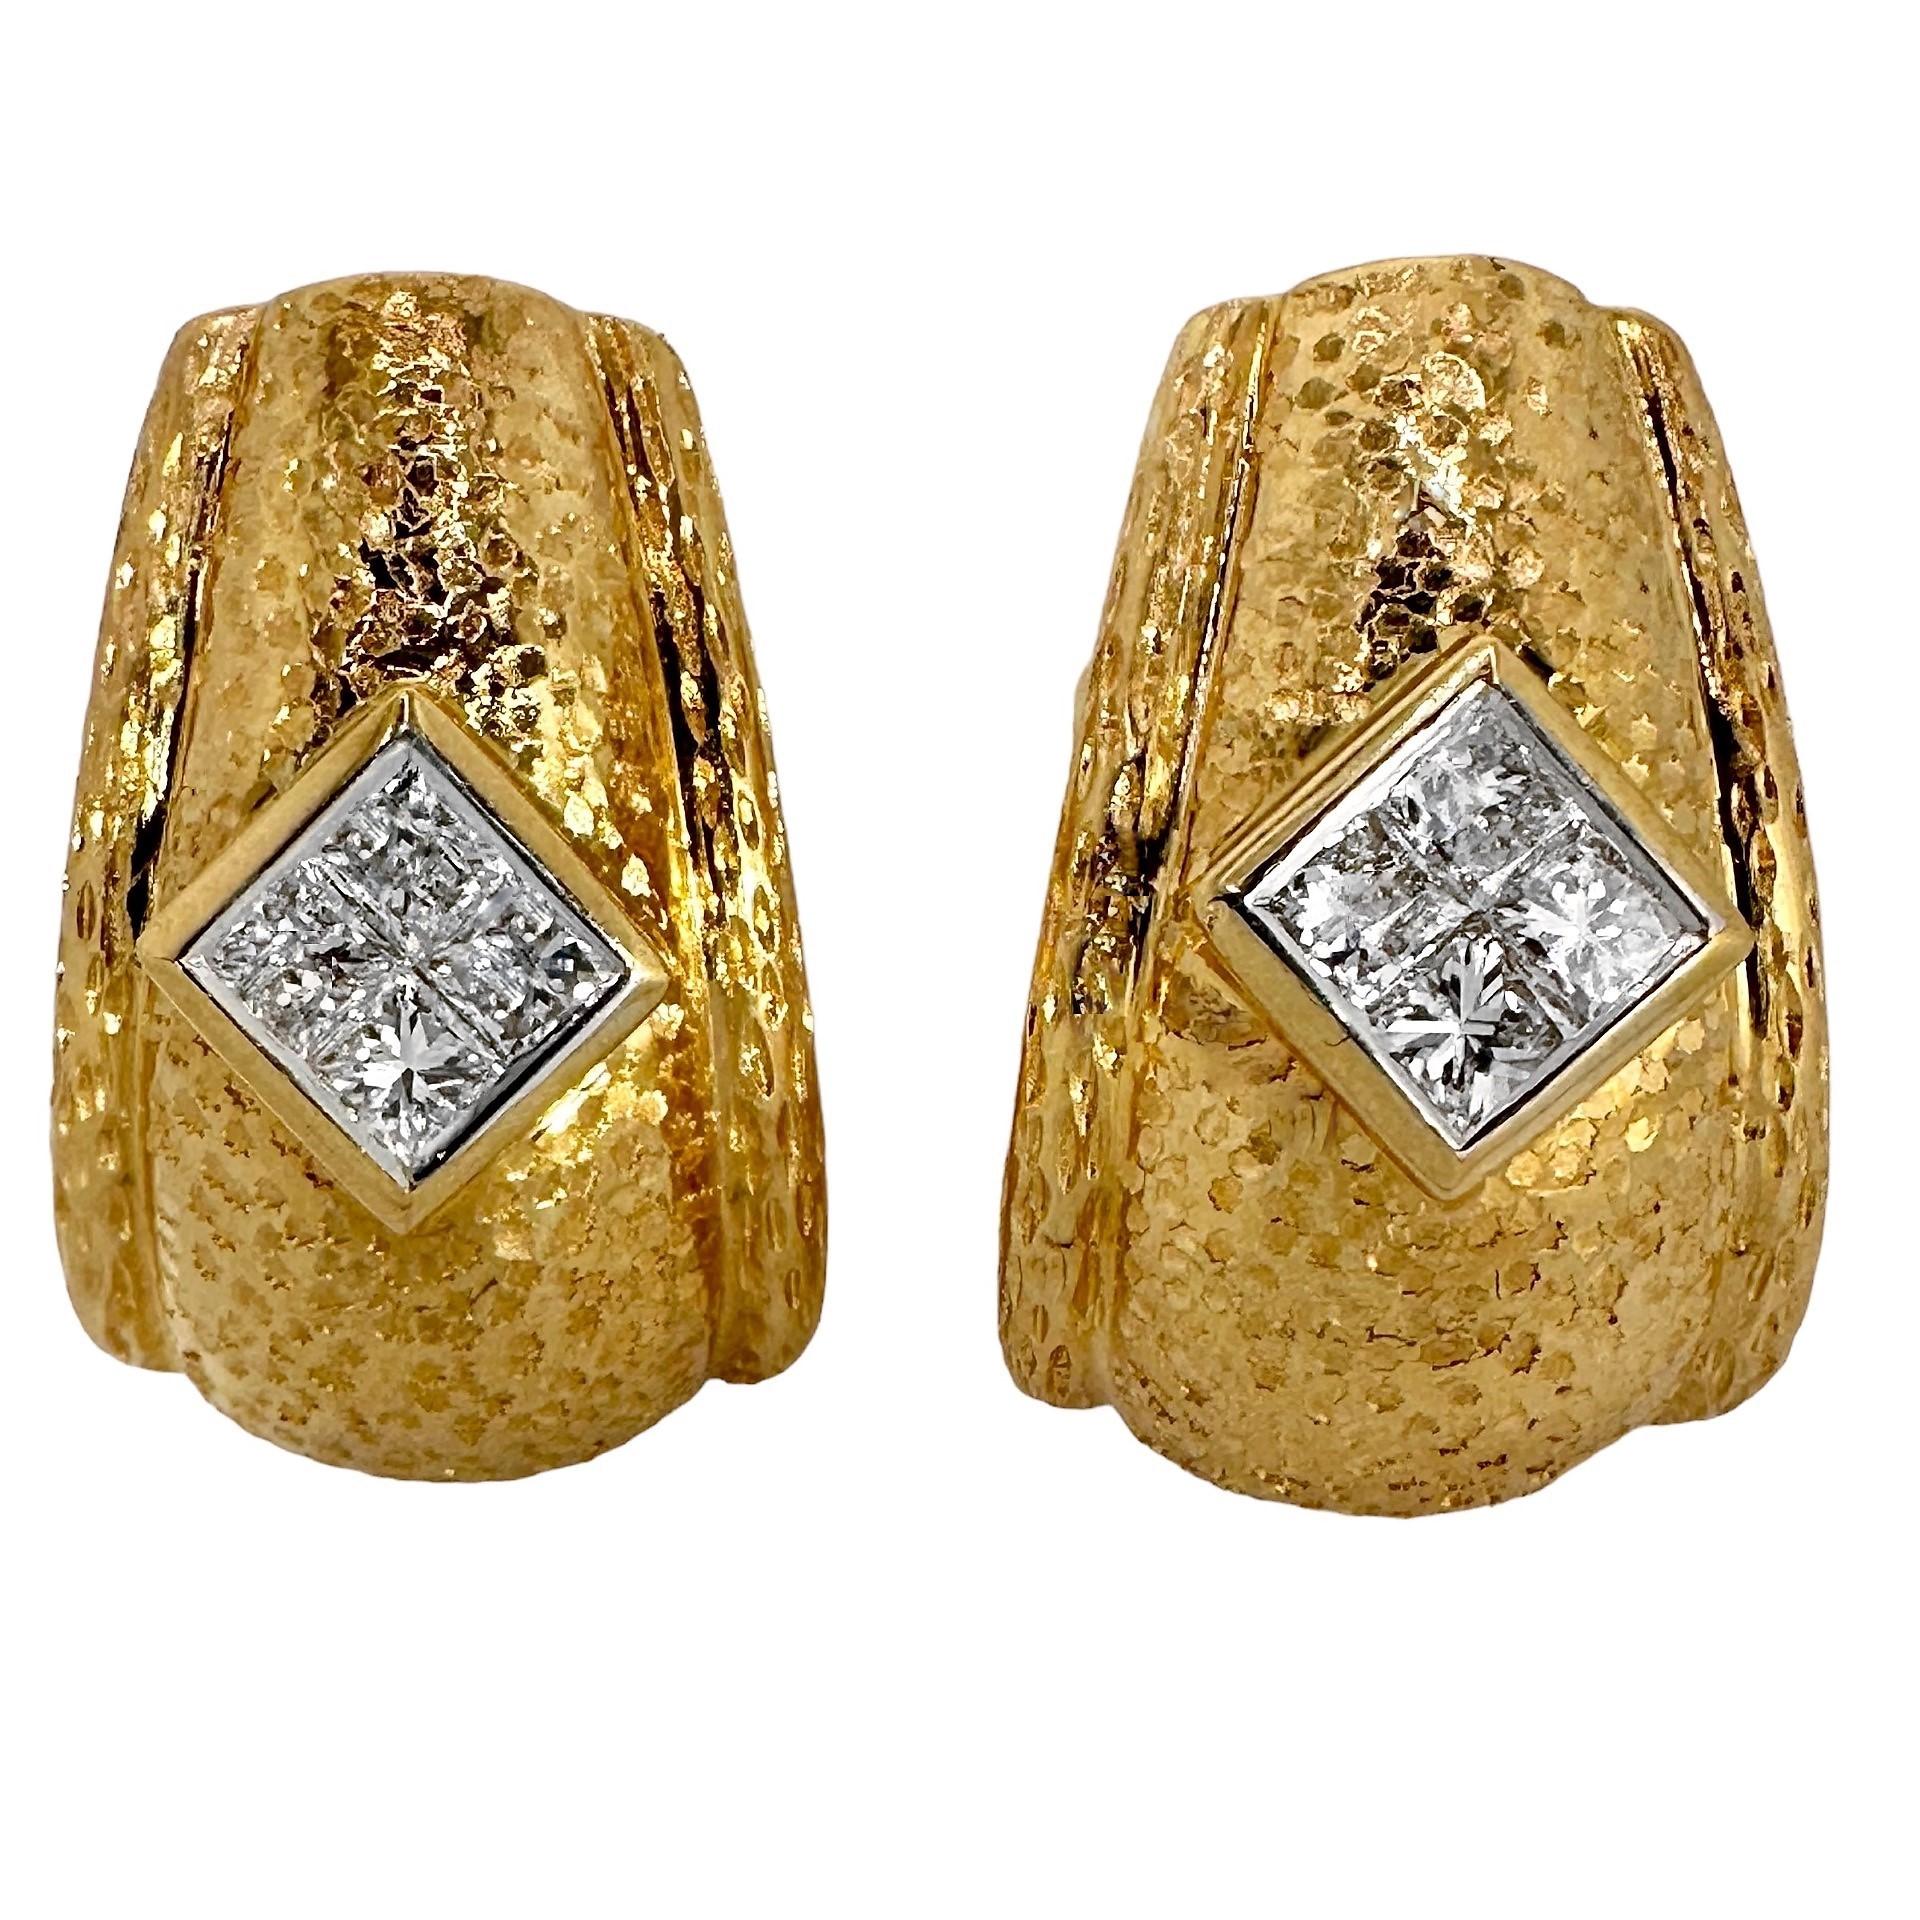 This expertly hammered and Bark finish pair of Late-20th Century 18k yellow gold j-hoop earrings are as well crafted  as they are striking and beautiful. Deep star motif hammering covers the entire center sections of this bombe dome pair, and raised